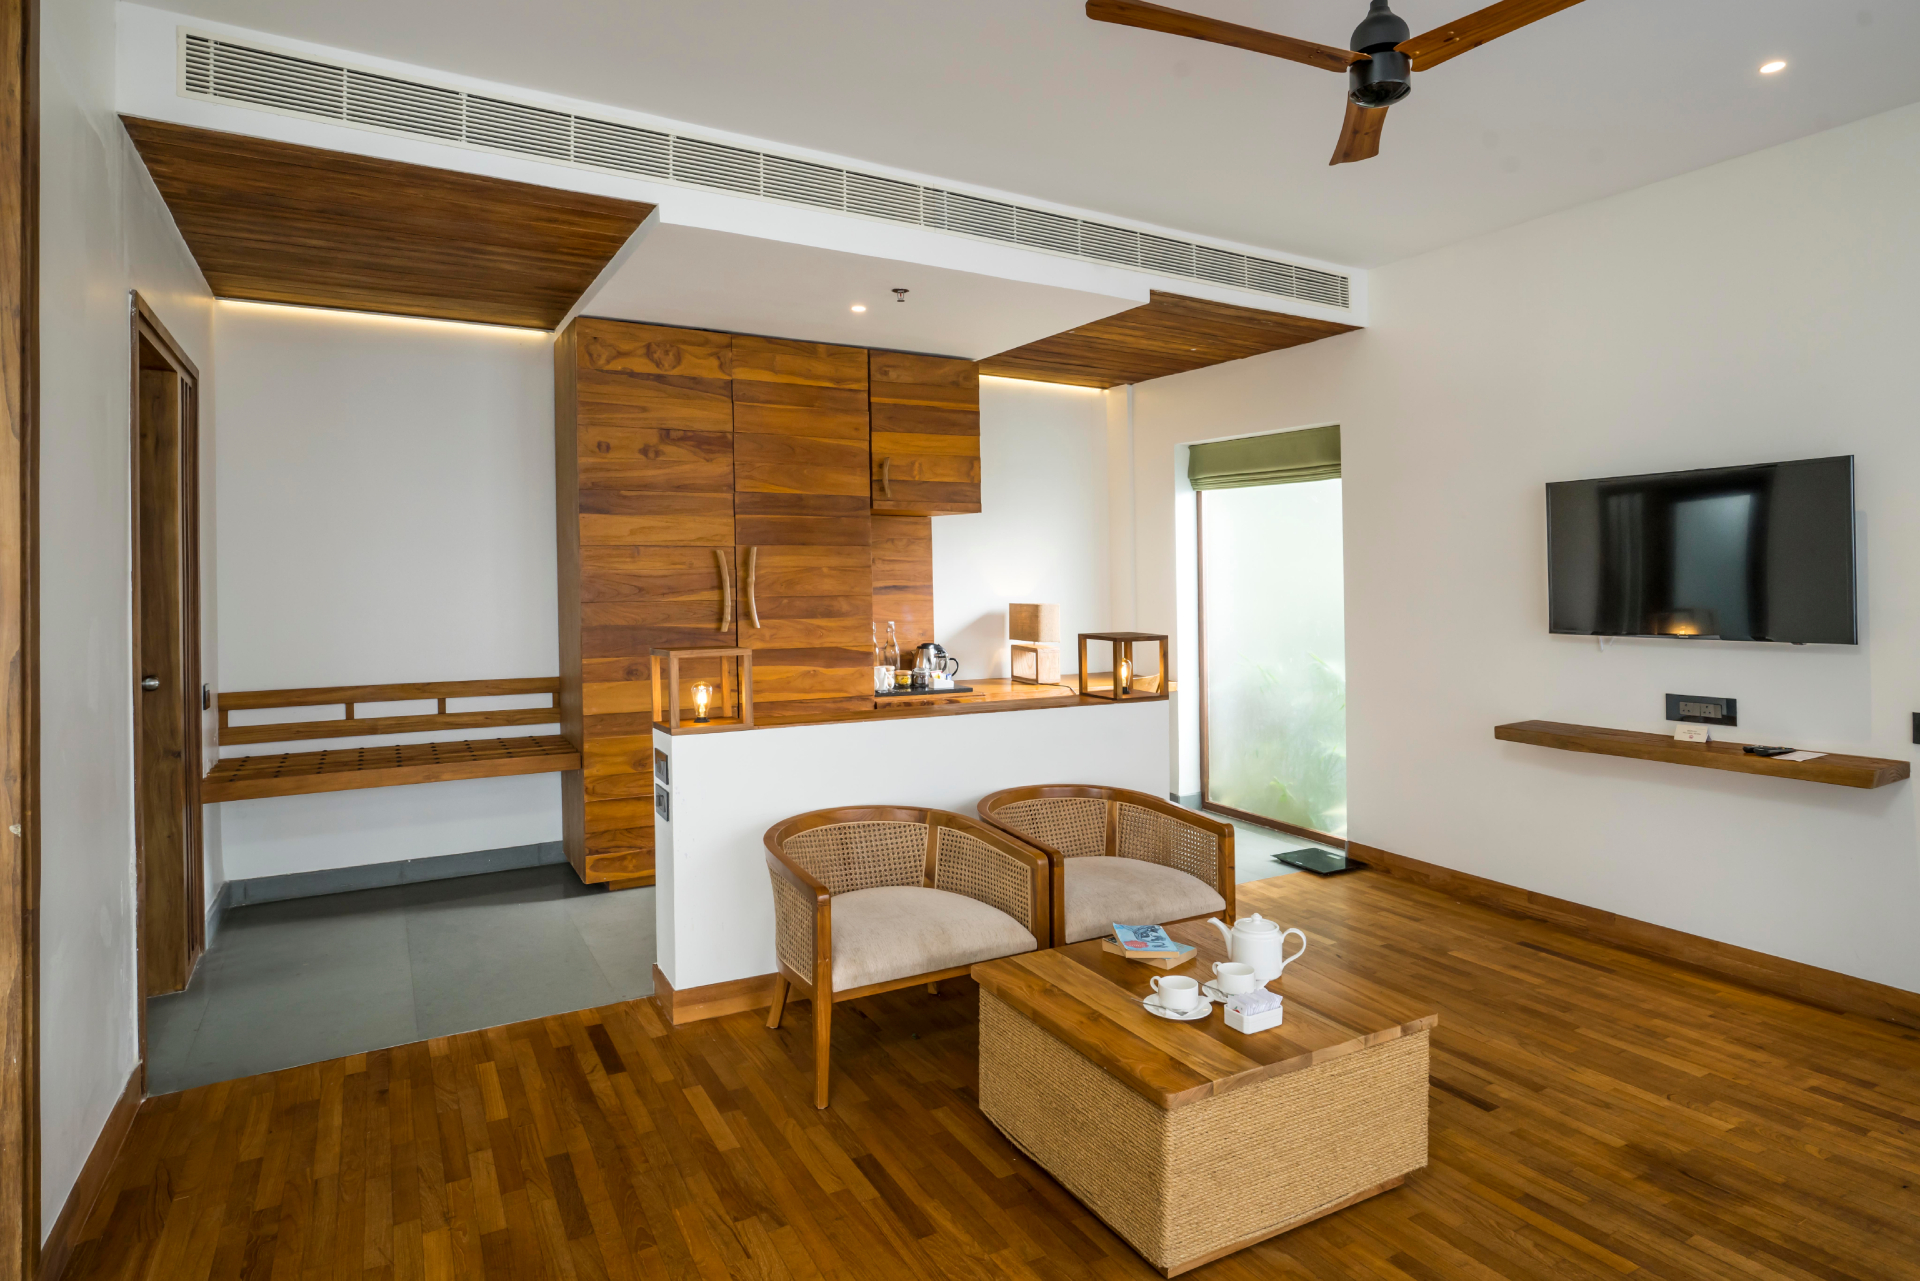 A view of the interior of the jacuzzi villa at Mountain Shadows resort in Wayanad